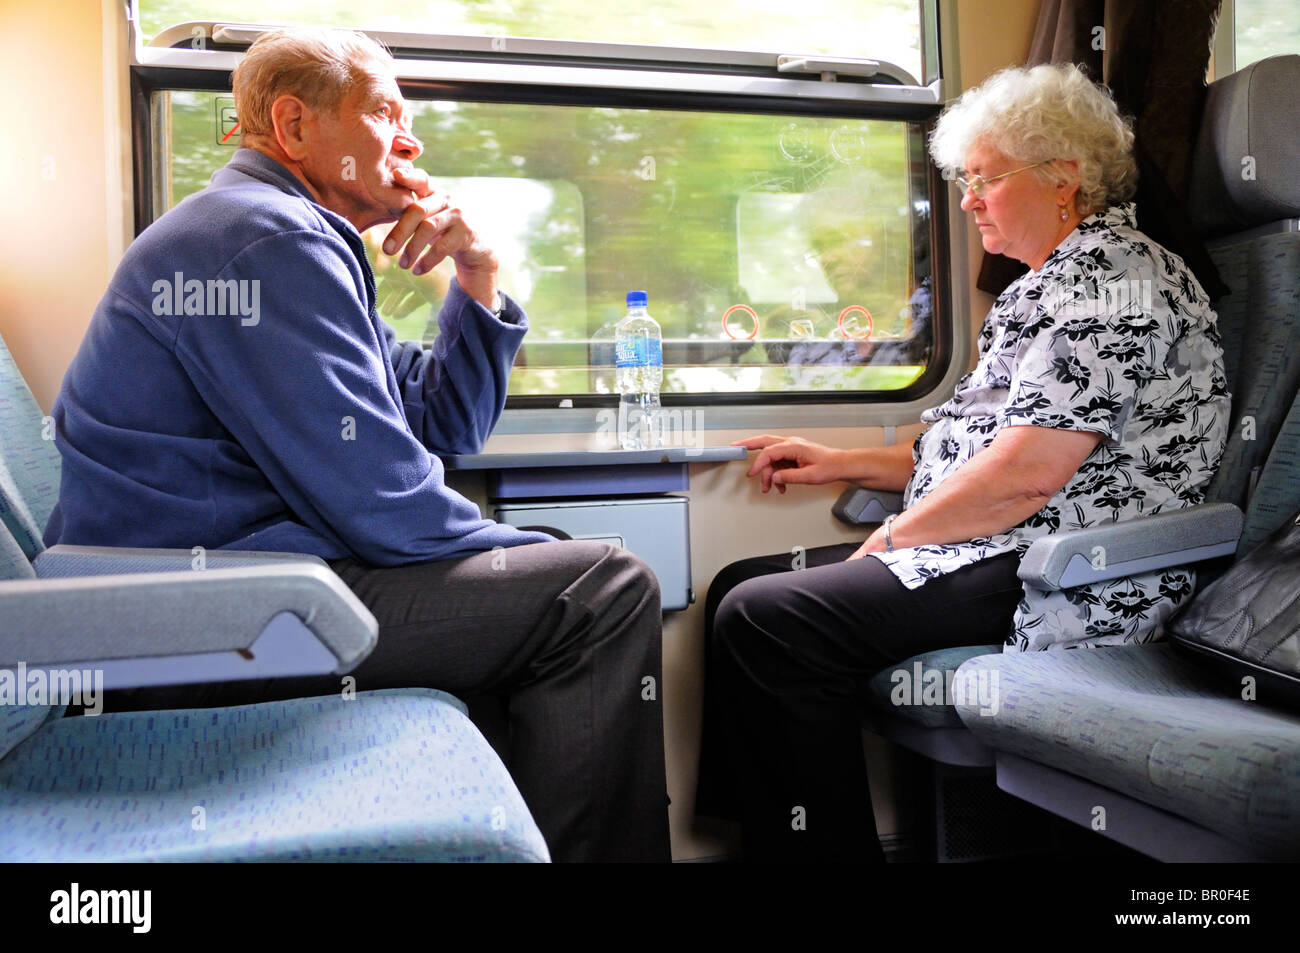 Hungary. Old couple on a train Stock Photo